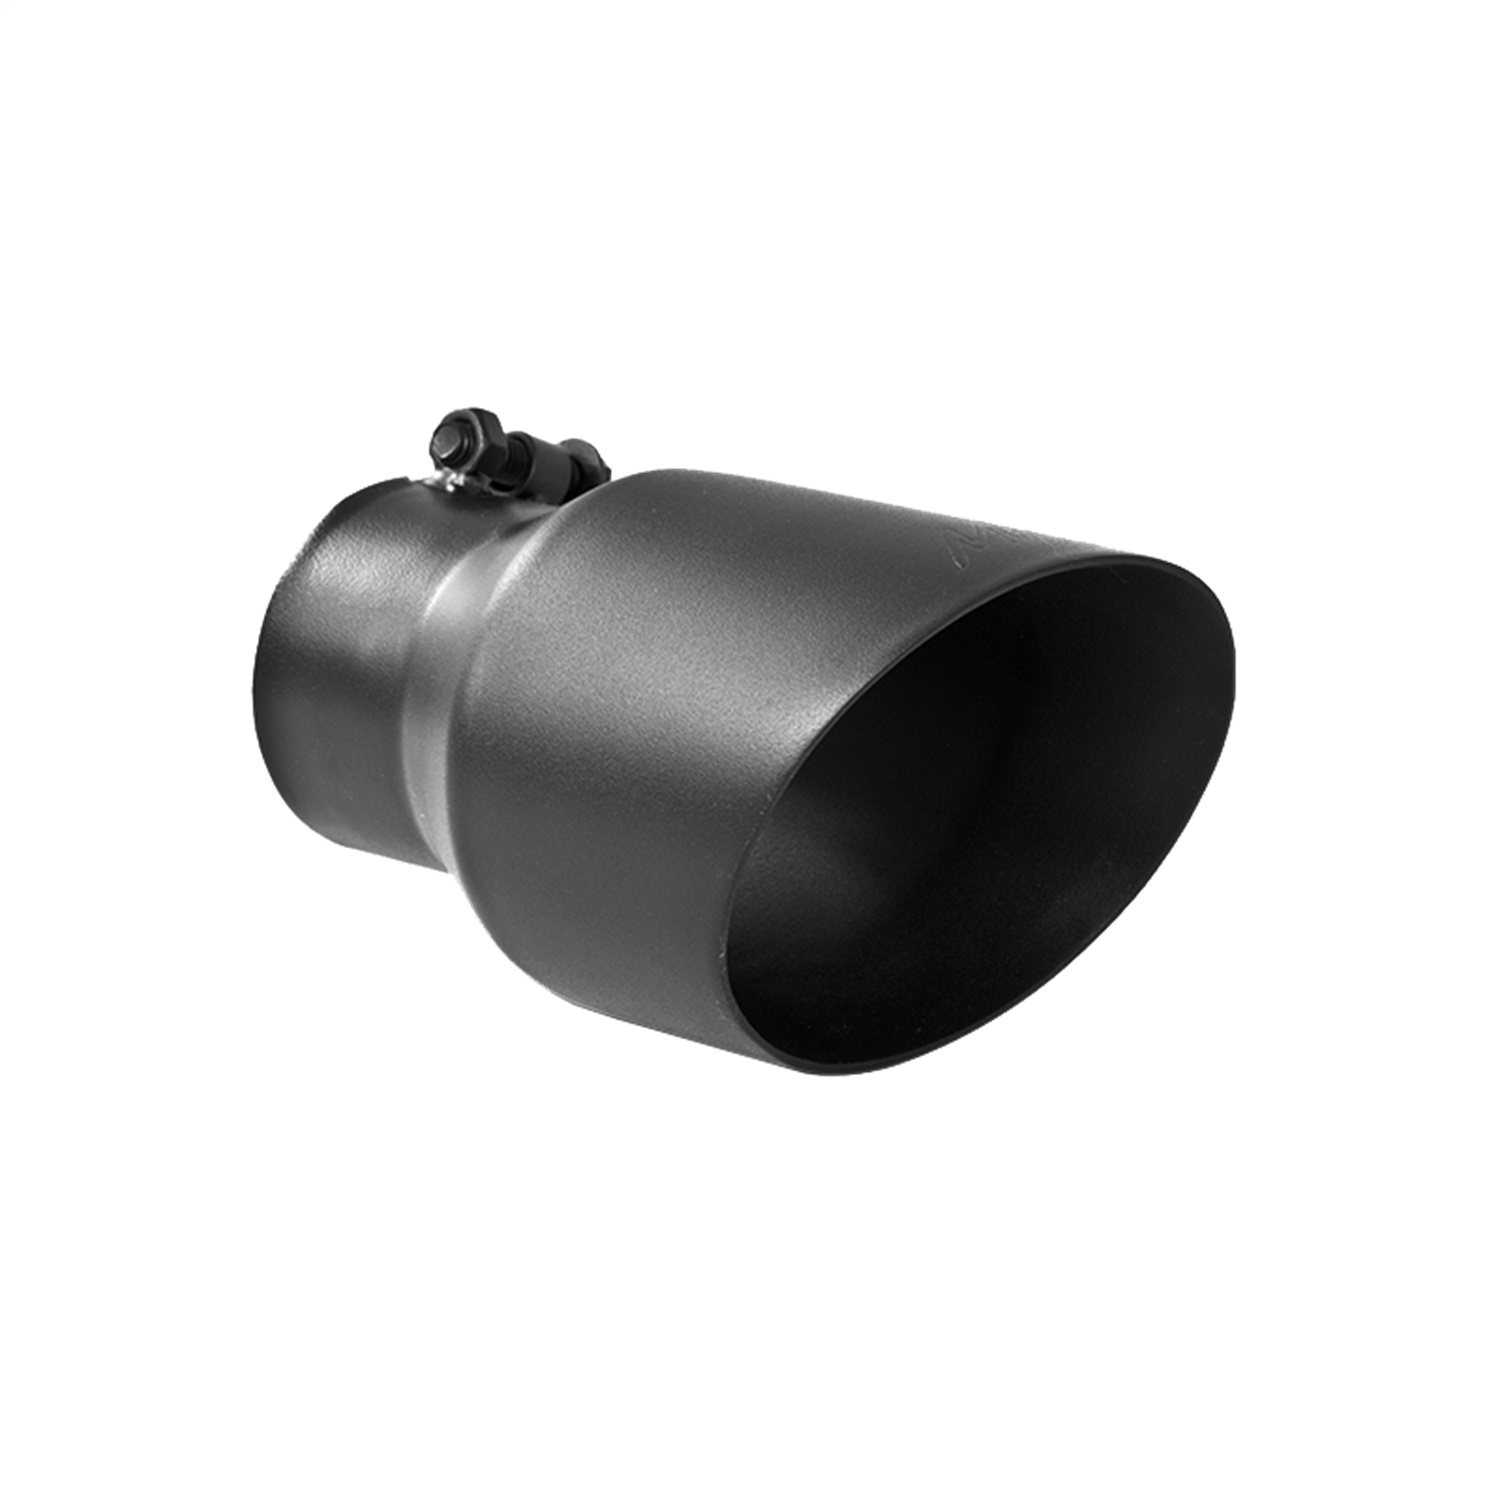 MBRP Exhaust MBRP Exhaust T5151BLK Dual Wall Angled Exhaust Tip